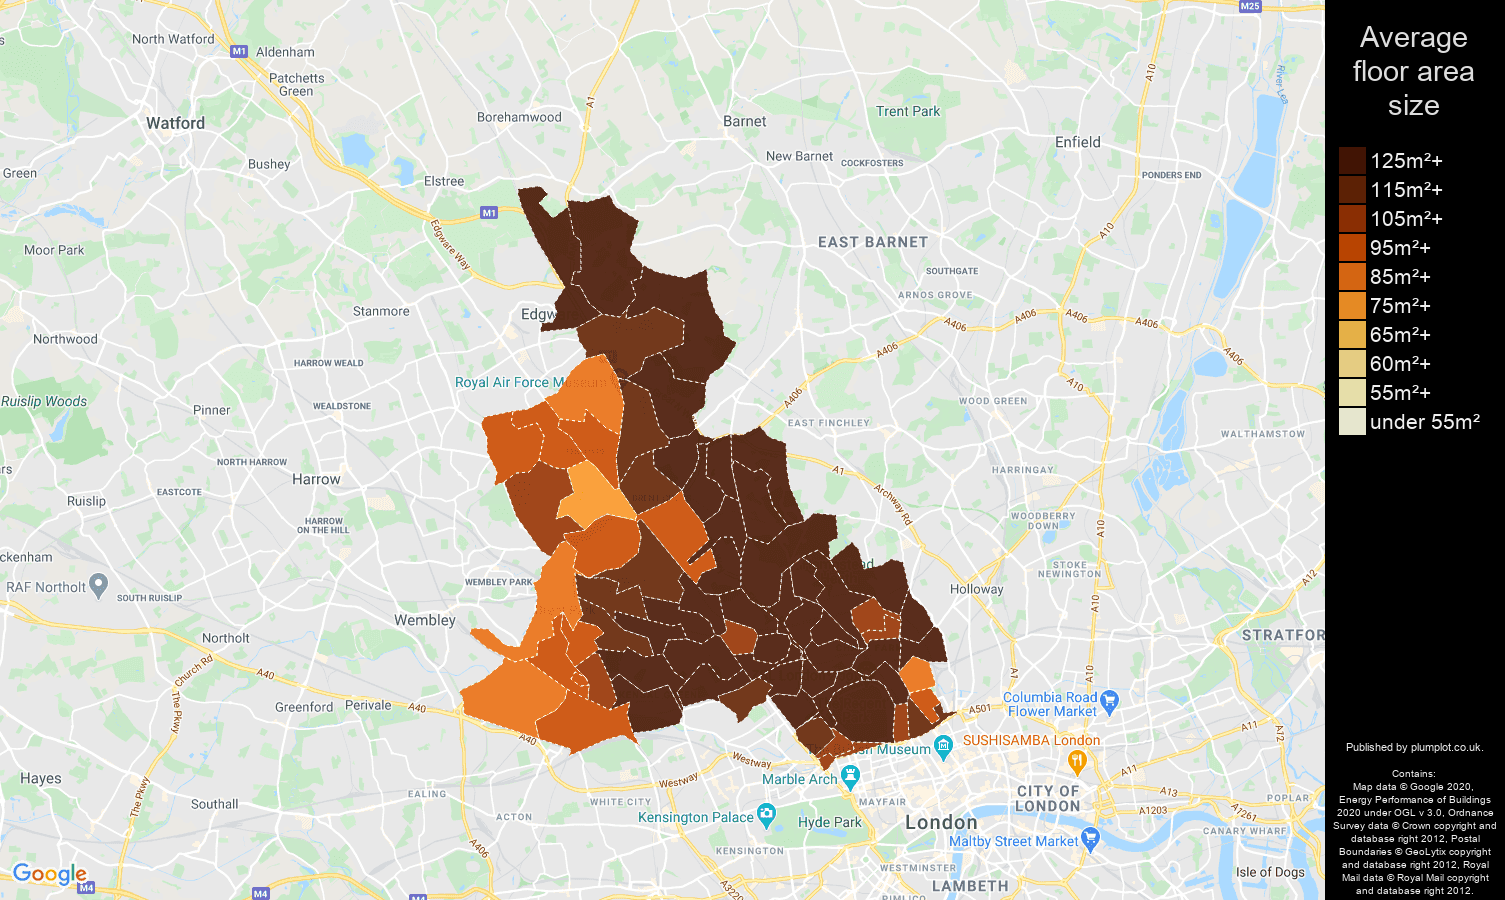 North West London map of average floor area size of houses